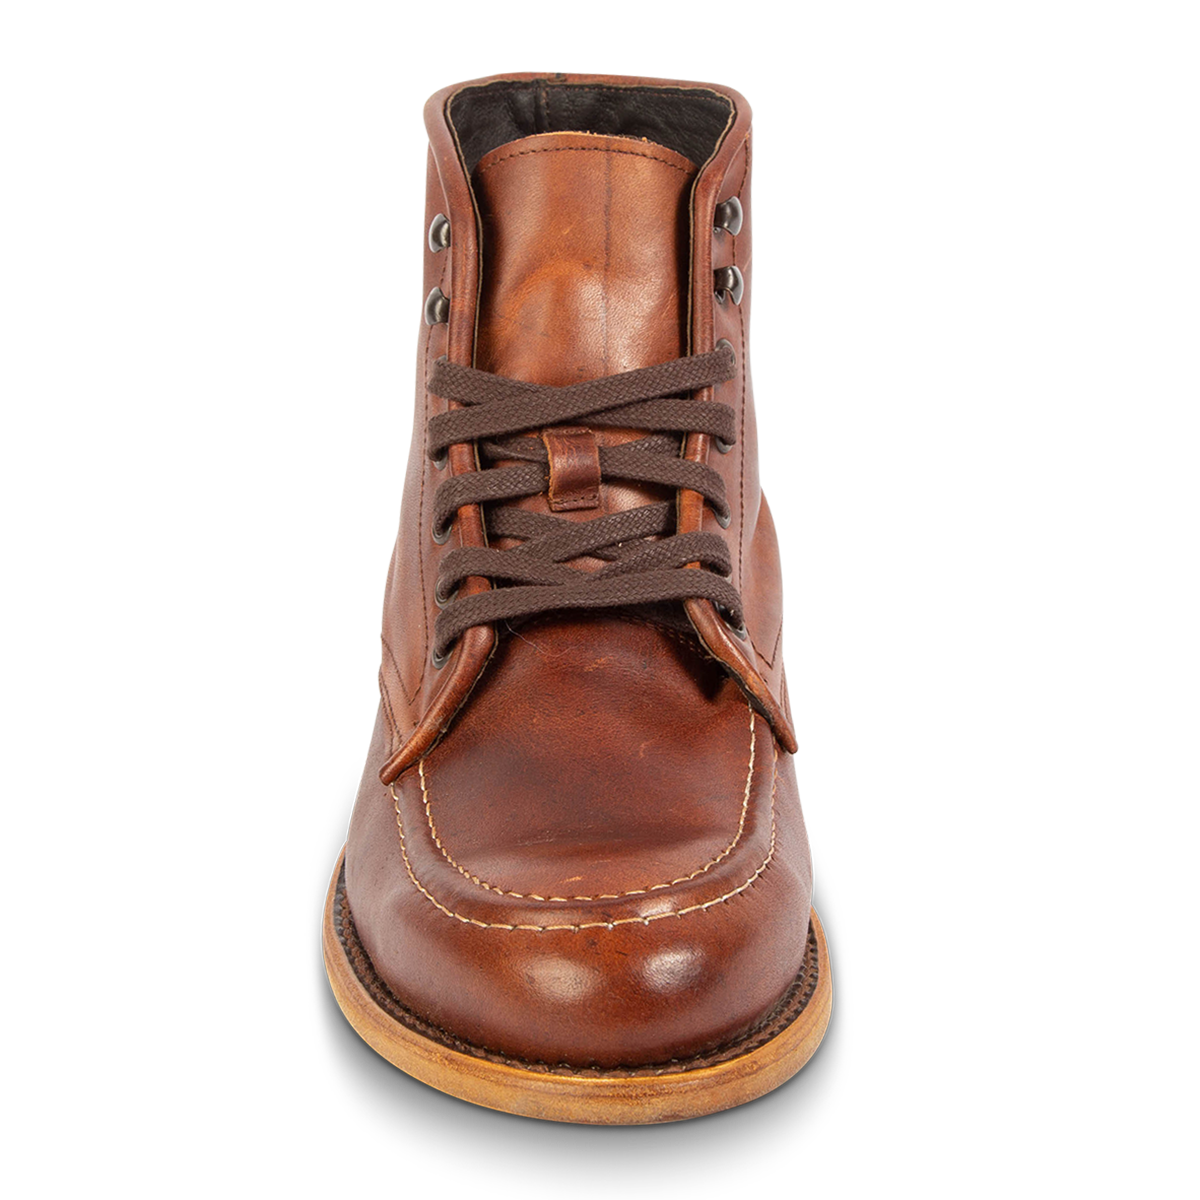 Front view showing leather tongue construction and adjustable leather lace closure on FREEBIRD men's Benning cognac boot